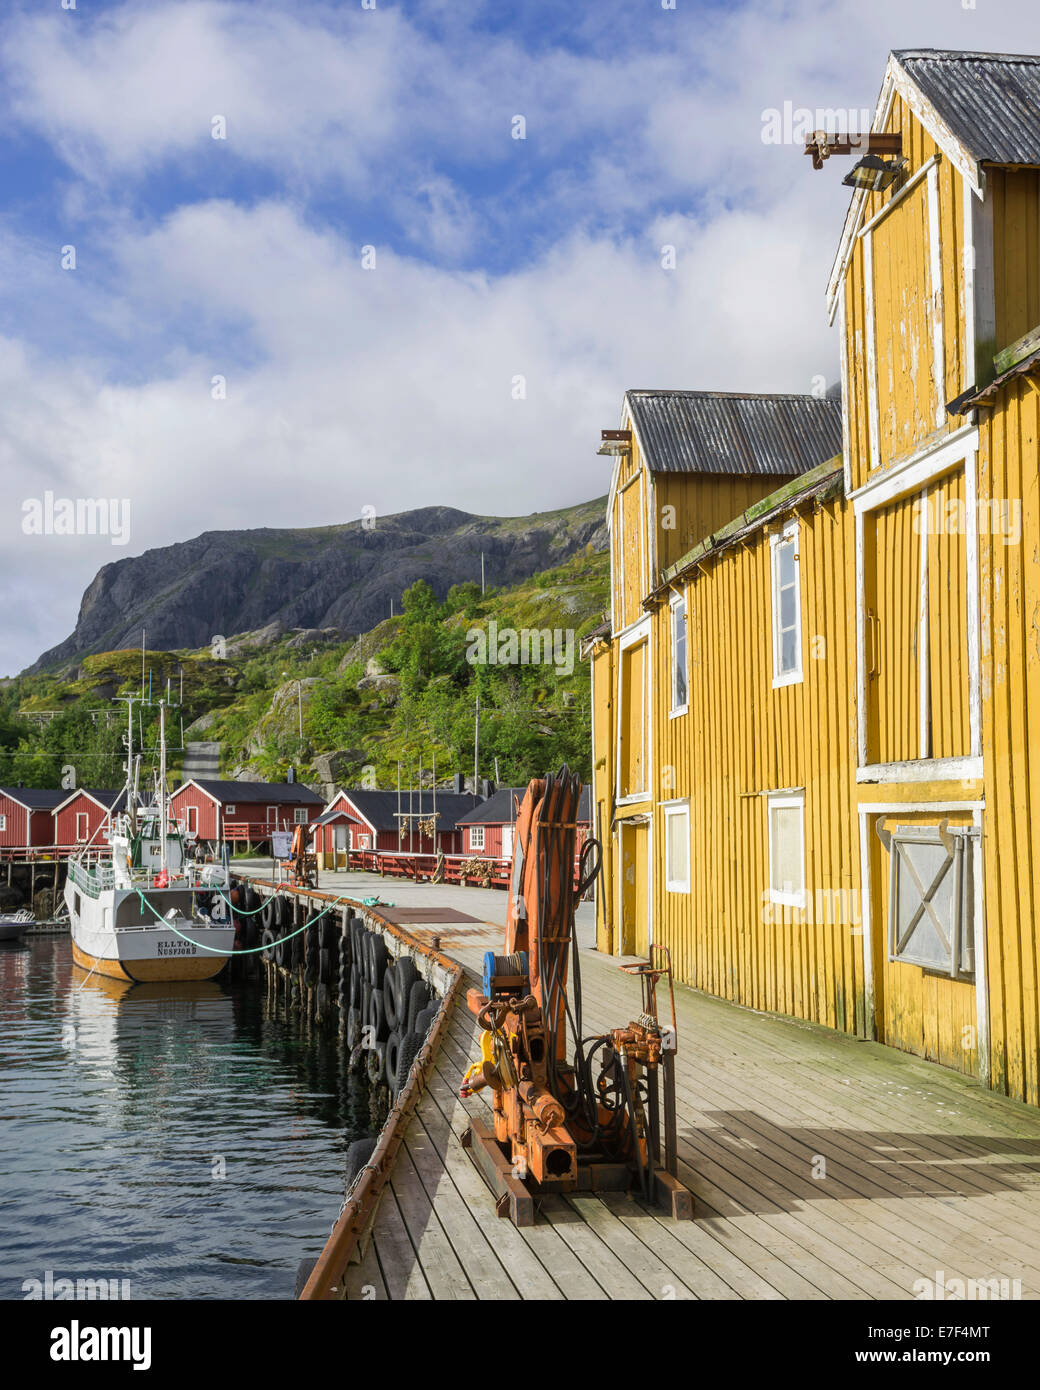 Warehouse and Rorbuer fishermen's cabins in the port of Nusfjord, Lofoten, Nordland, Norway Stock Photo